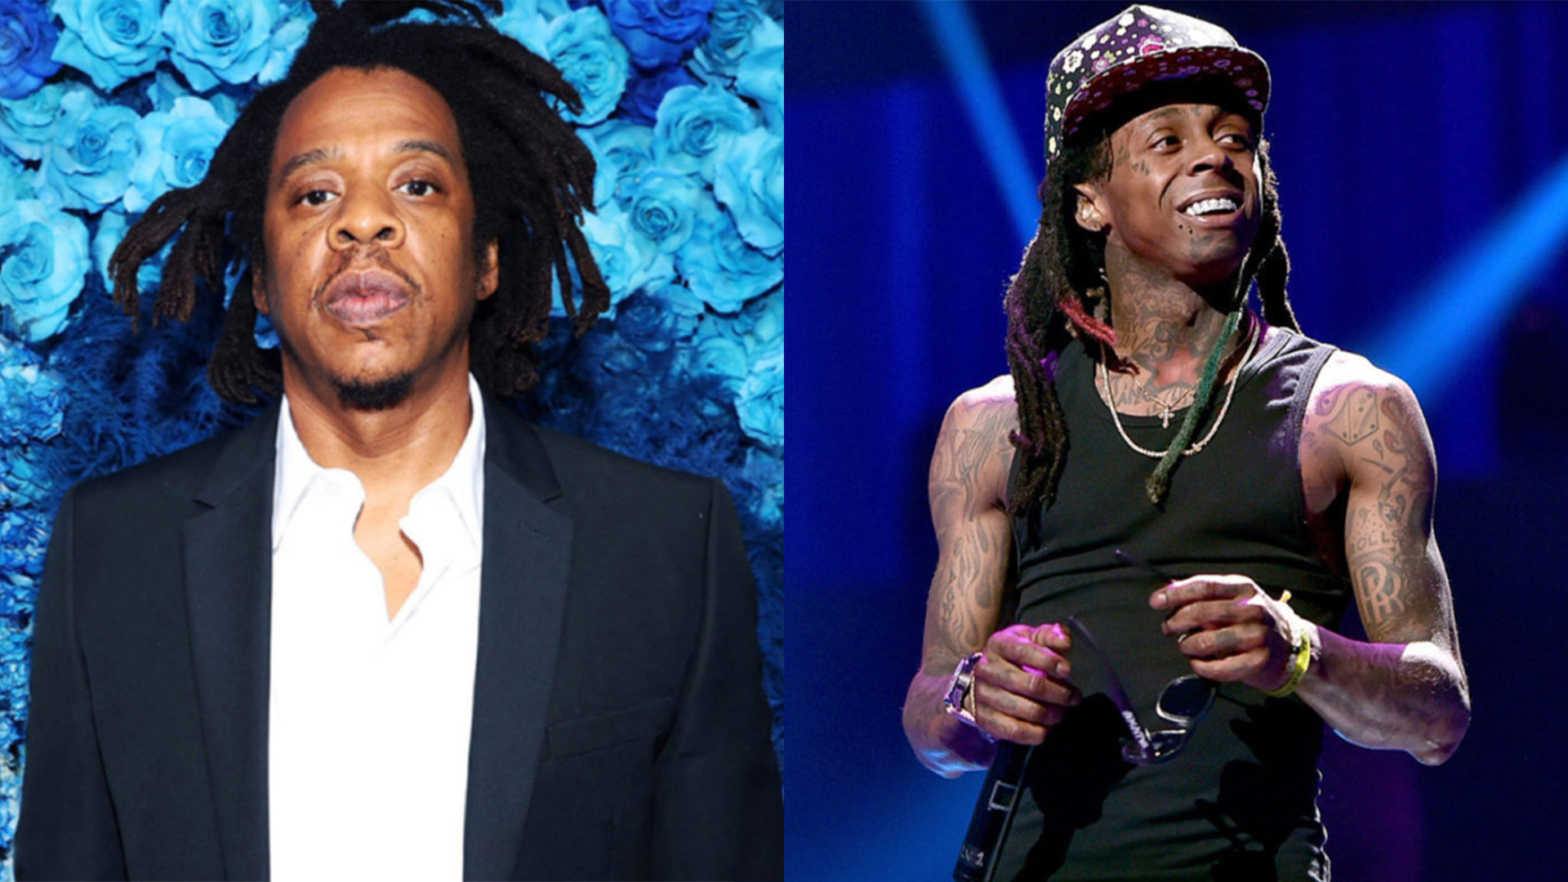 Lil Wayne Once Recalled Jay-Z Offering Him $175K To Join Roc-A-Fella — 'We Laugh About That All The Time'